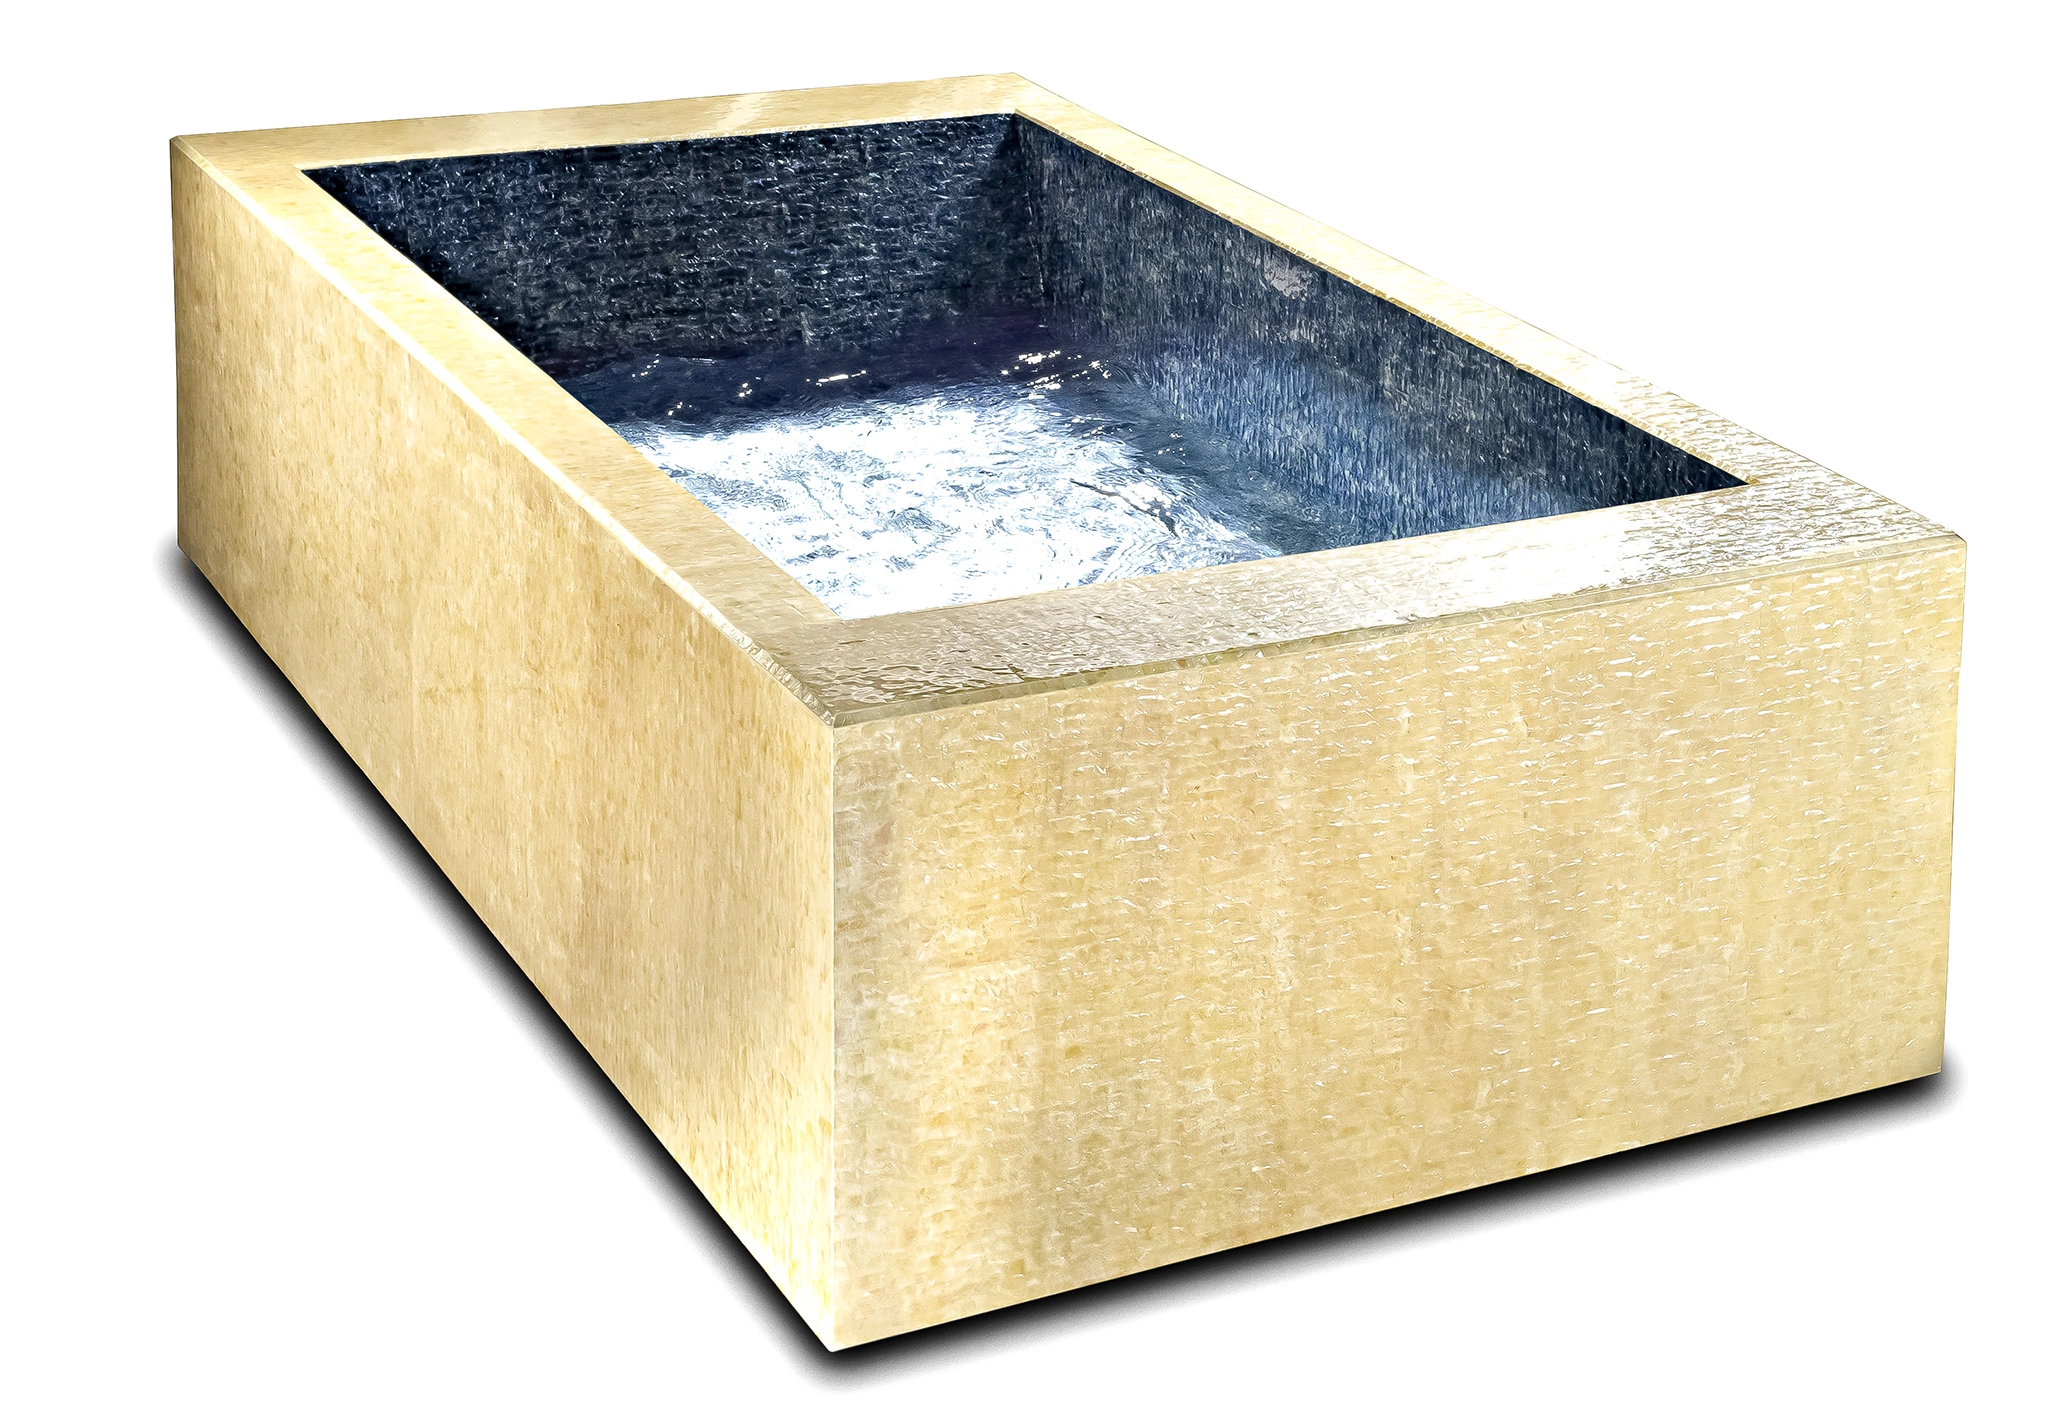 mother of pearl pool a rectangular box with a silver lining